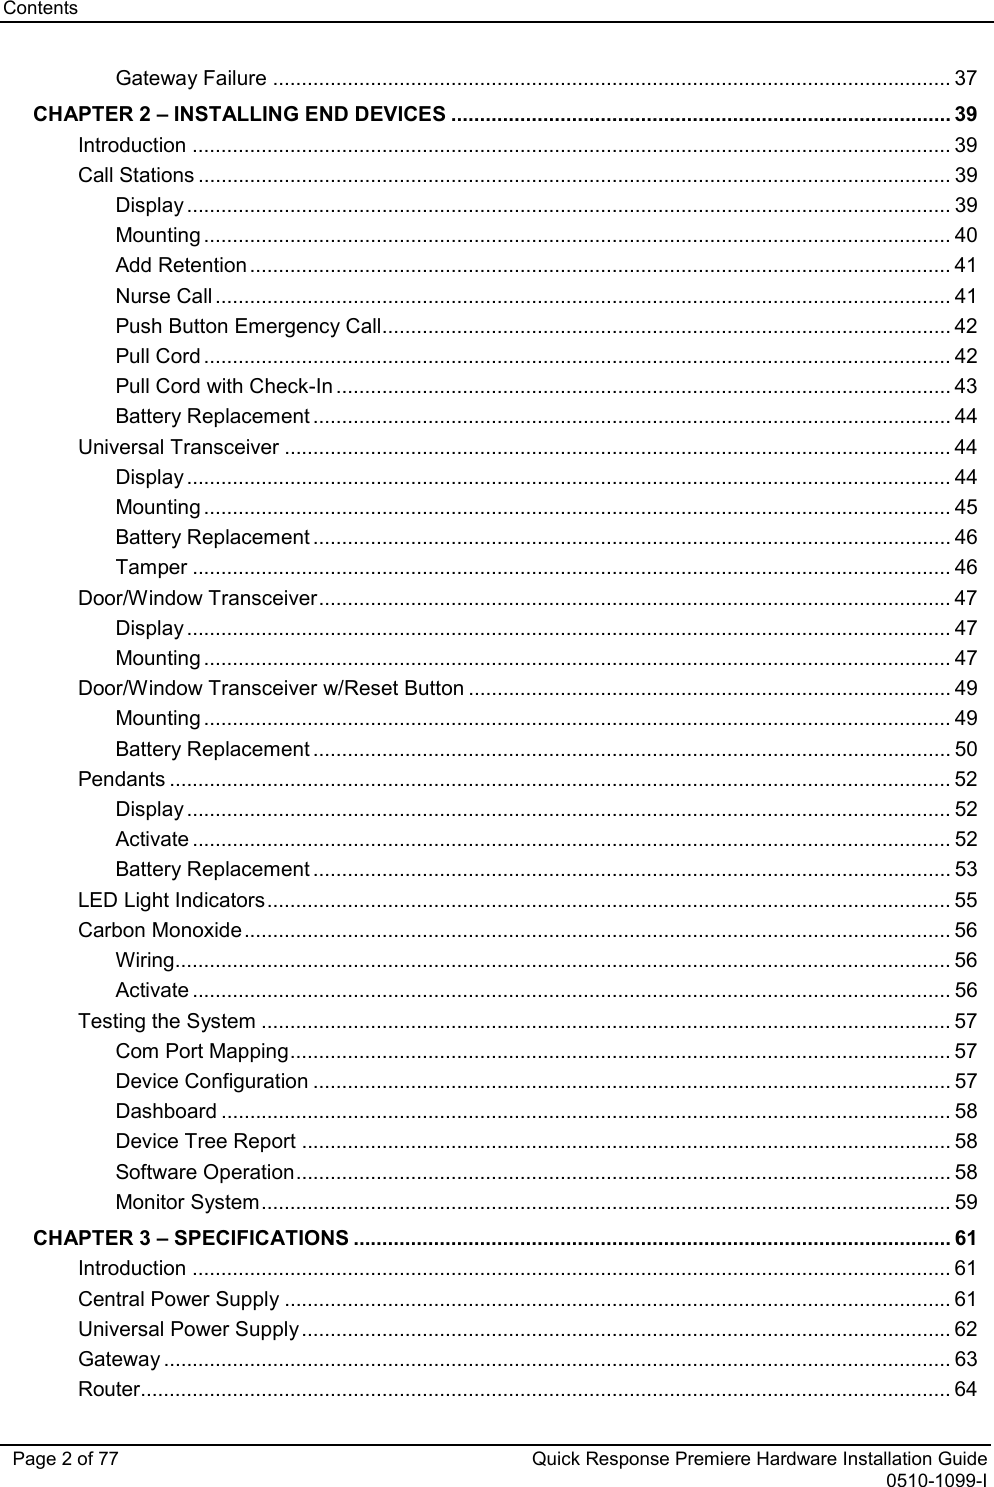 Contents   Page 2 of 77 Quick Response Premiere Hardware Installation Guide 0510-1099-I Gateway Failure ...................................................................................................................... 37 CHAPTER 2 – INSTALLING END DEVICES ....................................................................................... 39 Introduction .................................................................................................................................... 39 Call Stations ................................................................................................................................... 39 Display ..................................................................................................................................... 39 Mounting .................................................................................................................................. 40 Add Retention .......................................................................................................................... 41 Nurse Call ................................................................................................................................ 41 Push Button Emergency Call ................................................................................................... 42 Pull Cord .................................................................................................................................. 42 Pull Cord with Check-In ........................................................................................................... 43 Battery Replacement ............................................................................................................... 44 Universal Transceiver .................................................................................................................... 44 Display ..................................................................................................................................... 44 Mounting .................................................................................................................................. 45 Battery Replacement ............................................................................................................... 46 Tamper .................................................................................................................................... 46 Door/Window Transceiver .............................................................................................................. 47 Display ..................................................................................................................................... 47 Mounting .................................................................................................................................. 47 Door/Window Transceiver w/Reset Button .................................................................................... 49 Mounting .................................................................................................................................. 49 Battery Replacement ............................................................................................................... 50 Pendants ........................................................................................................................................ 52 Display ..................................................................................................................................... 52 Activate .................................................................................................................................... 52 Battery Replacement ............................................................................................................... 53 LED Light Indicators ....................................................................................................................... 55 Carbon Monoxide ........................................................................................................................... 56 Wiring ....................................................................................................................................... 56 Activate .................................................................................................................................... 56 Testing the System ........................................................................................................................ 57 Com Port Mapping ................................................................................................................... 57 Device Configuration ............................................................................................................... 57 Dashboard ............................................................................................................................... 58 Device Tree Report ................................................................................................................. 58 Software Operation .................................................................................................................. 58 Monitor System ........................................................................................................................ 59 CHAPTER 3 – SPECIFICATIONS ........................................................................................................ 61 Introduction .................................................................................................................................... 61 Central Power Supply .................................................................................................................... 61 Universal Power Supply ................................................................................................................. 62 Gateway ......................................................................................................................................... 63 Router............................................................................................................................................. 64 